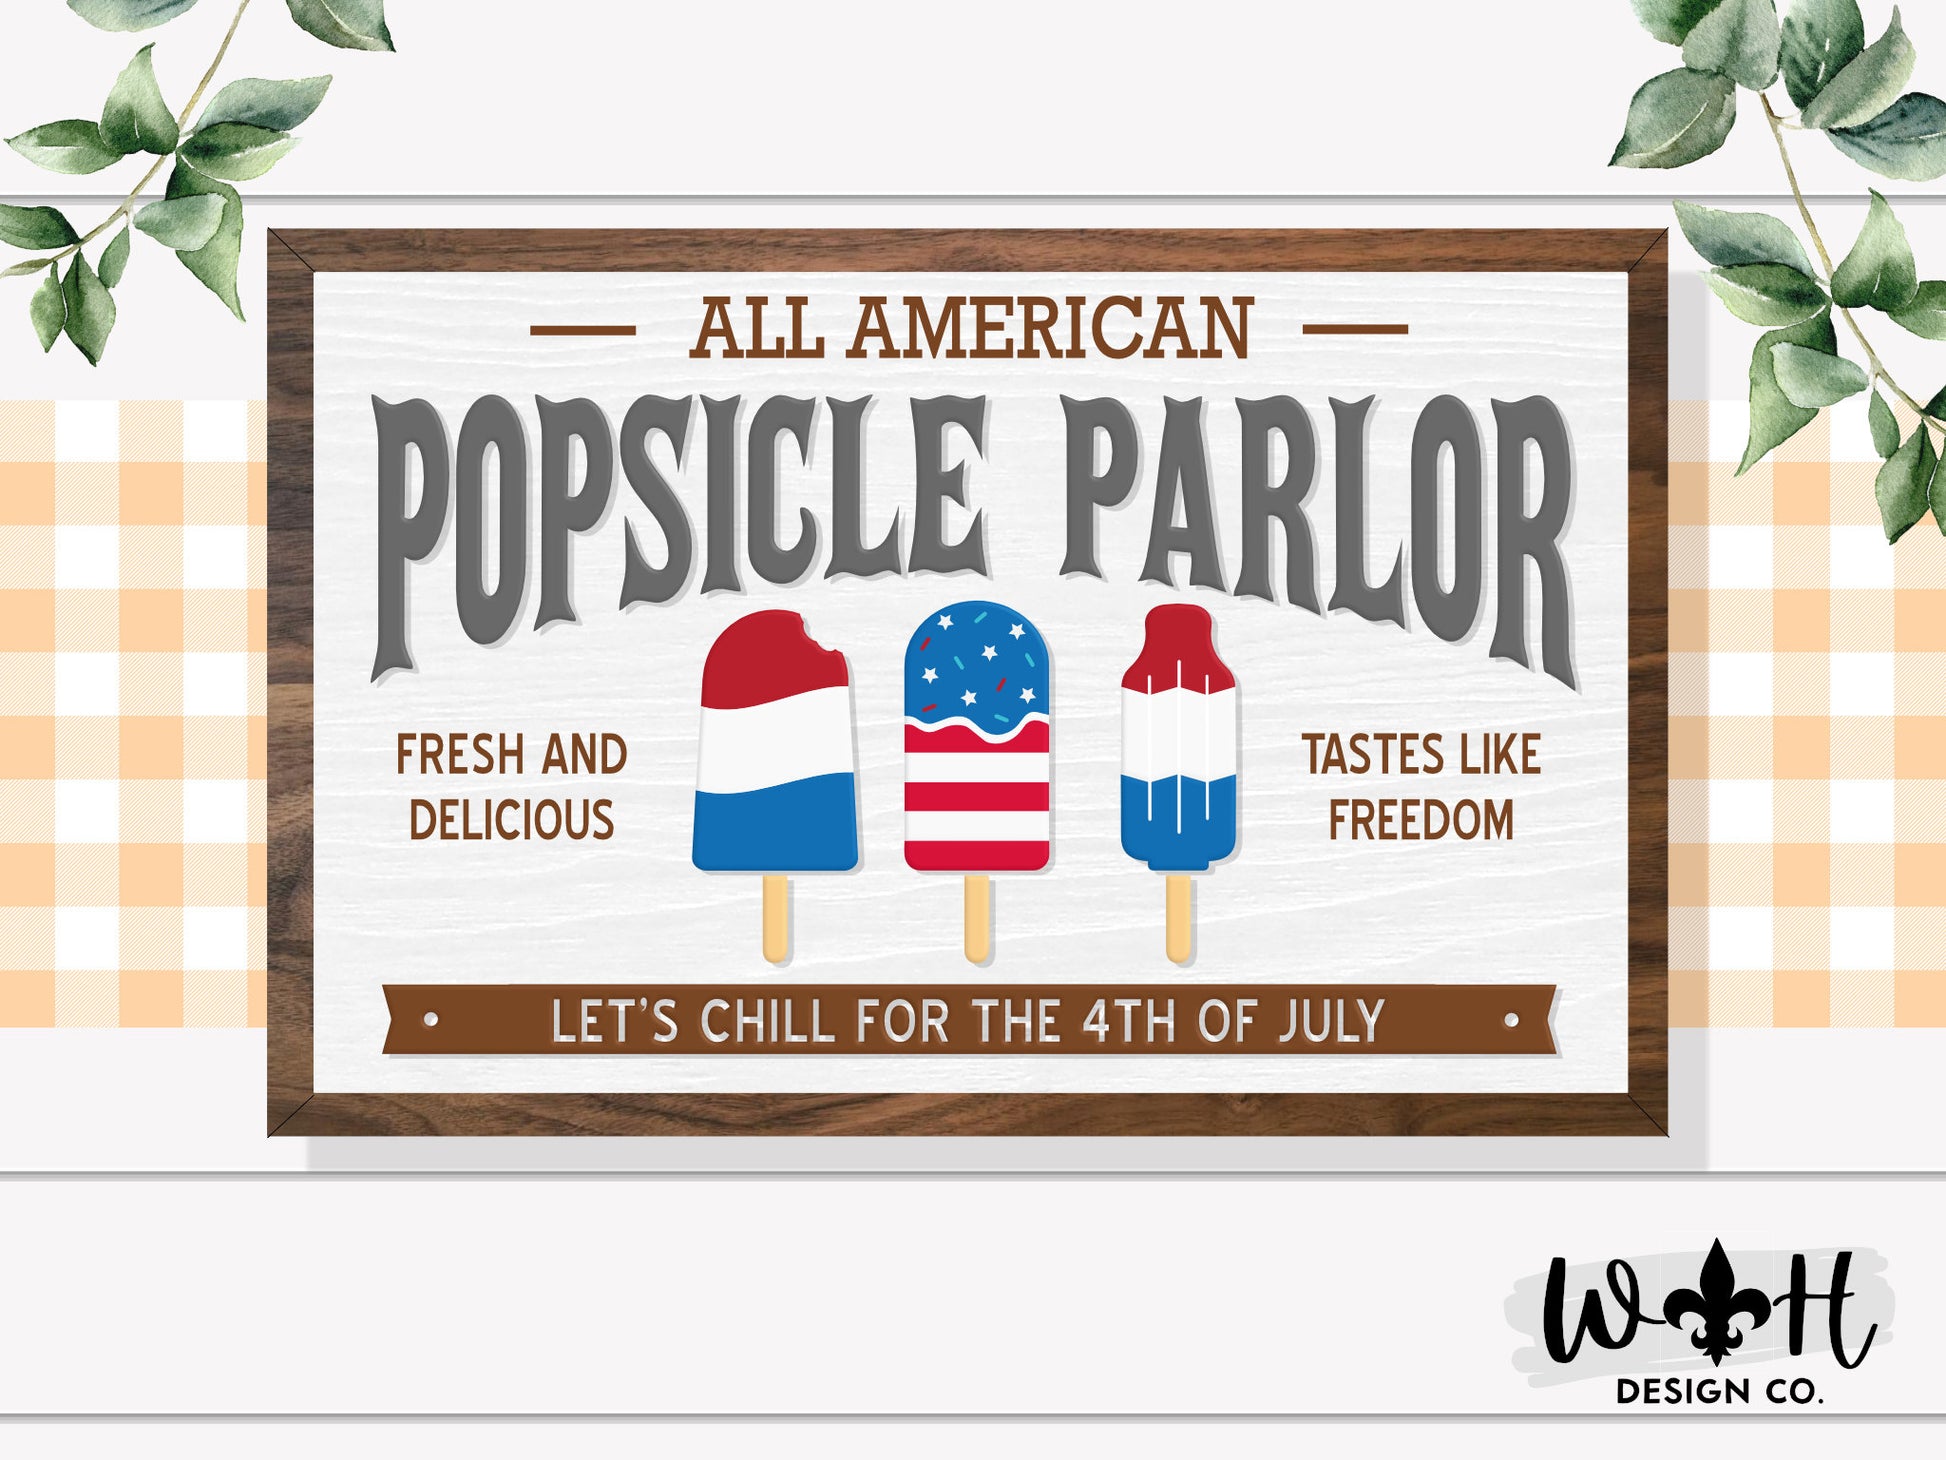 All American Popsicle Parlor - July Fourth Summer Coffee Bar Sign - Modern Farmhouse Sign - Home and Kitchen Decor - Wood Framed Wall Art